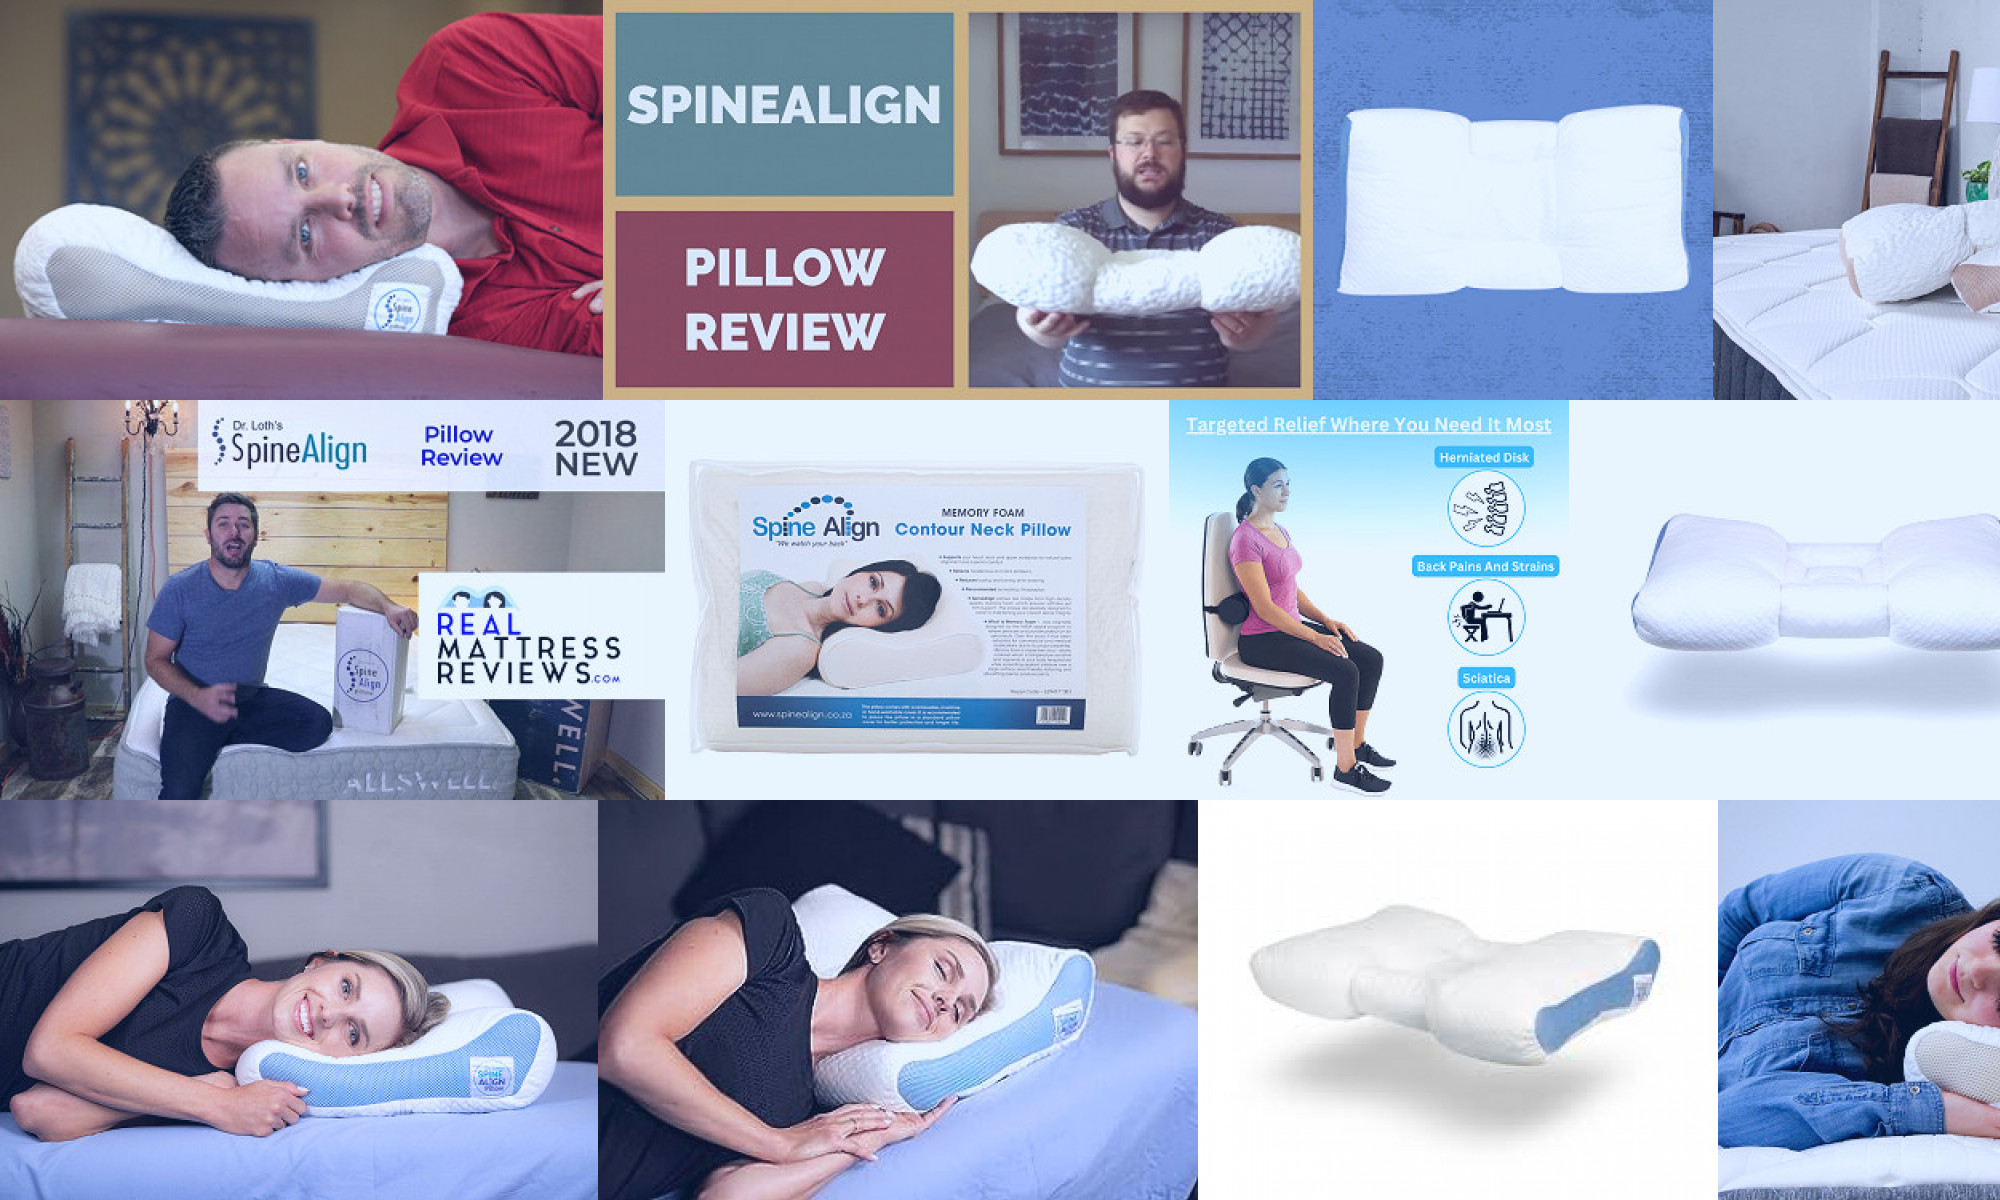 spinealign pillow